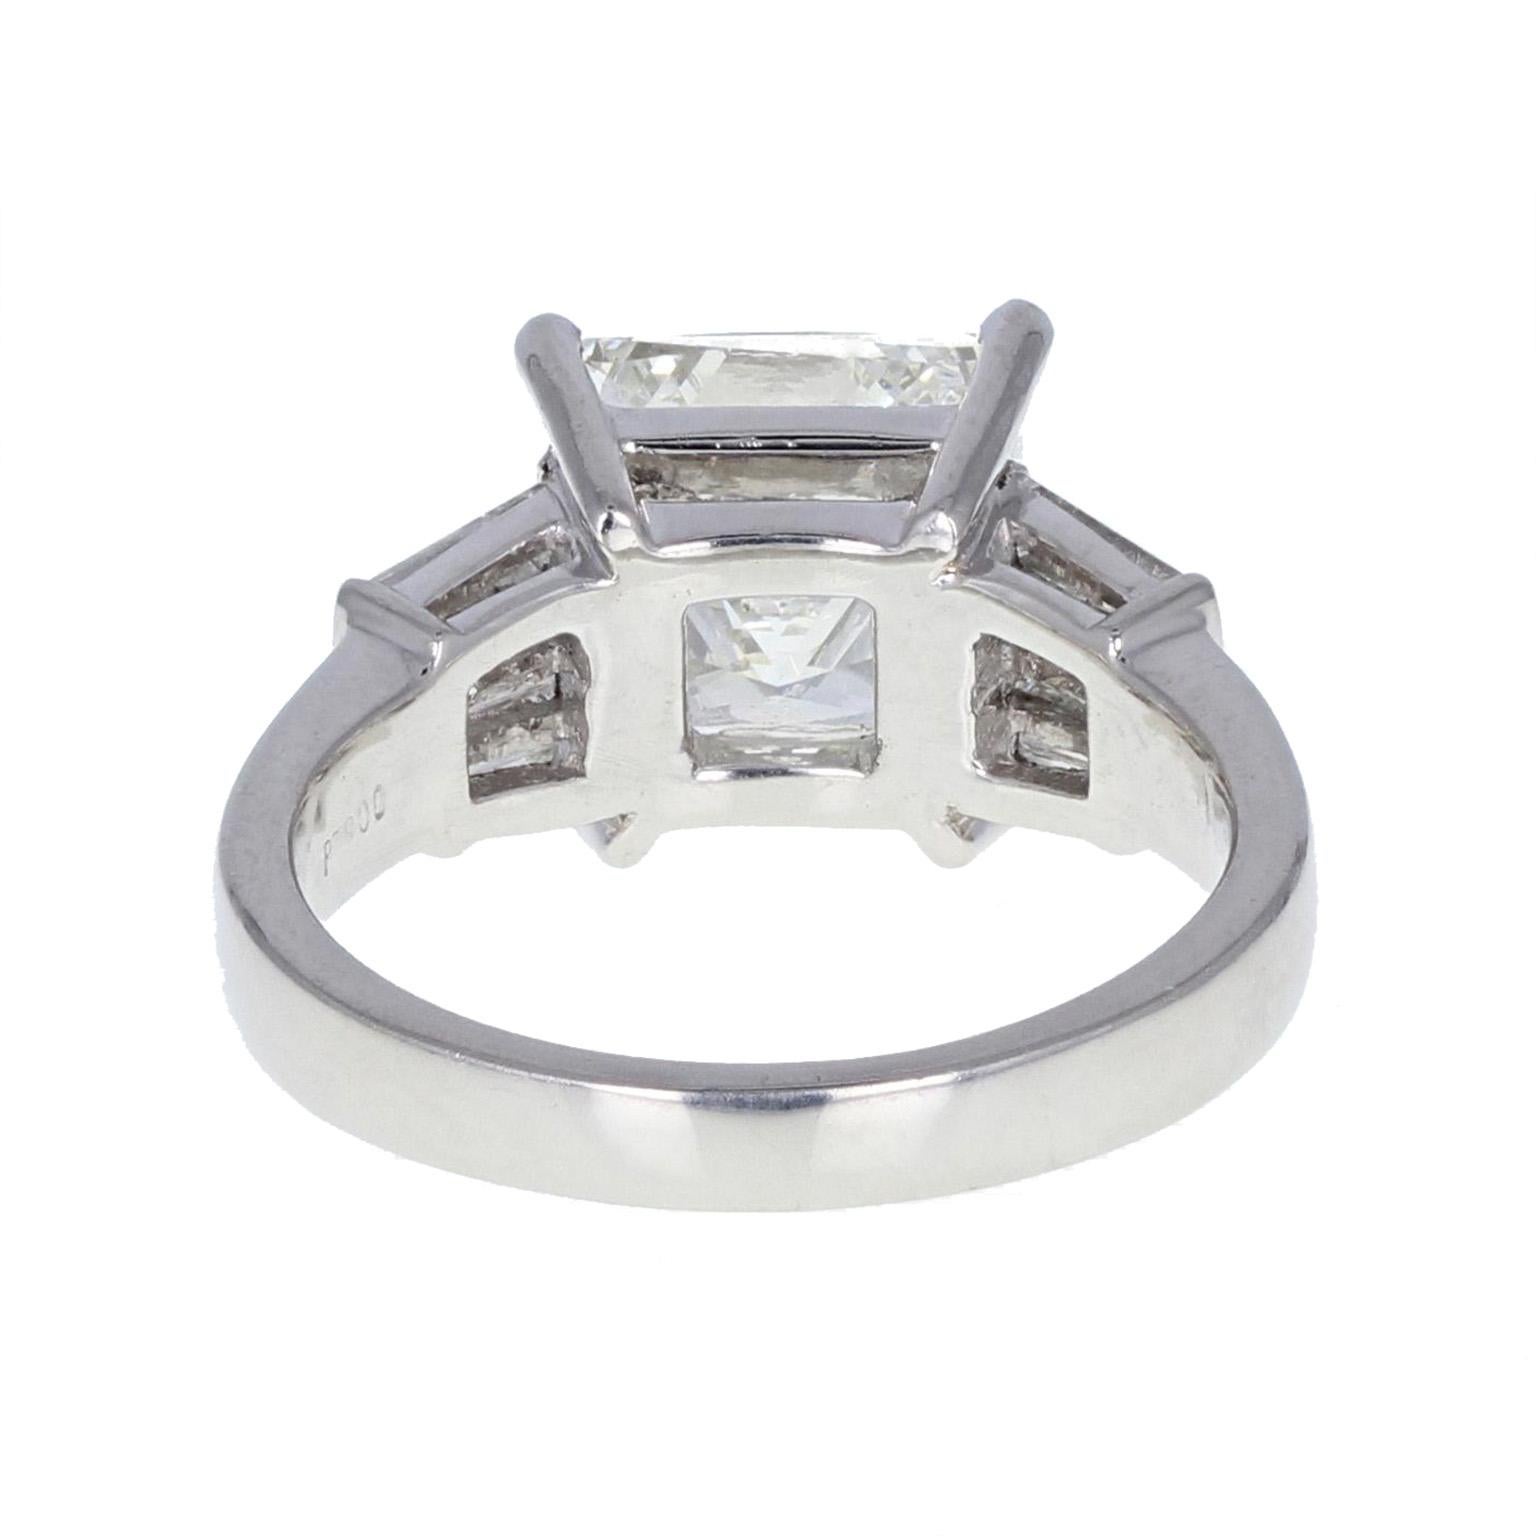 Modern GIA 5.01 Carat Princess Cut Diamond Solitaire Engagement Ring For Sale